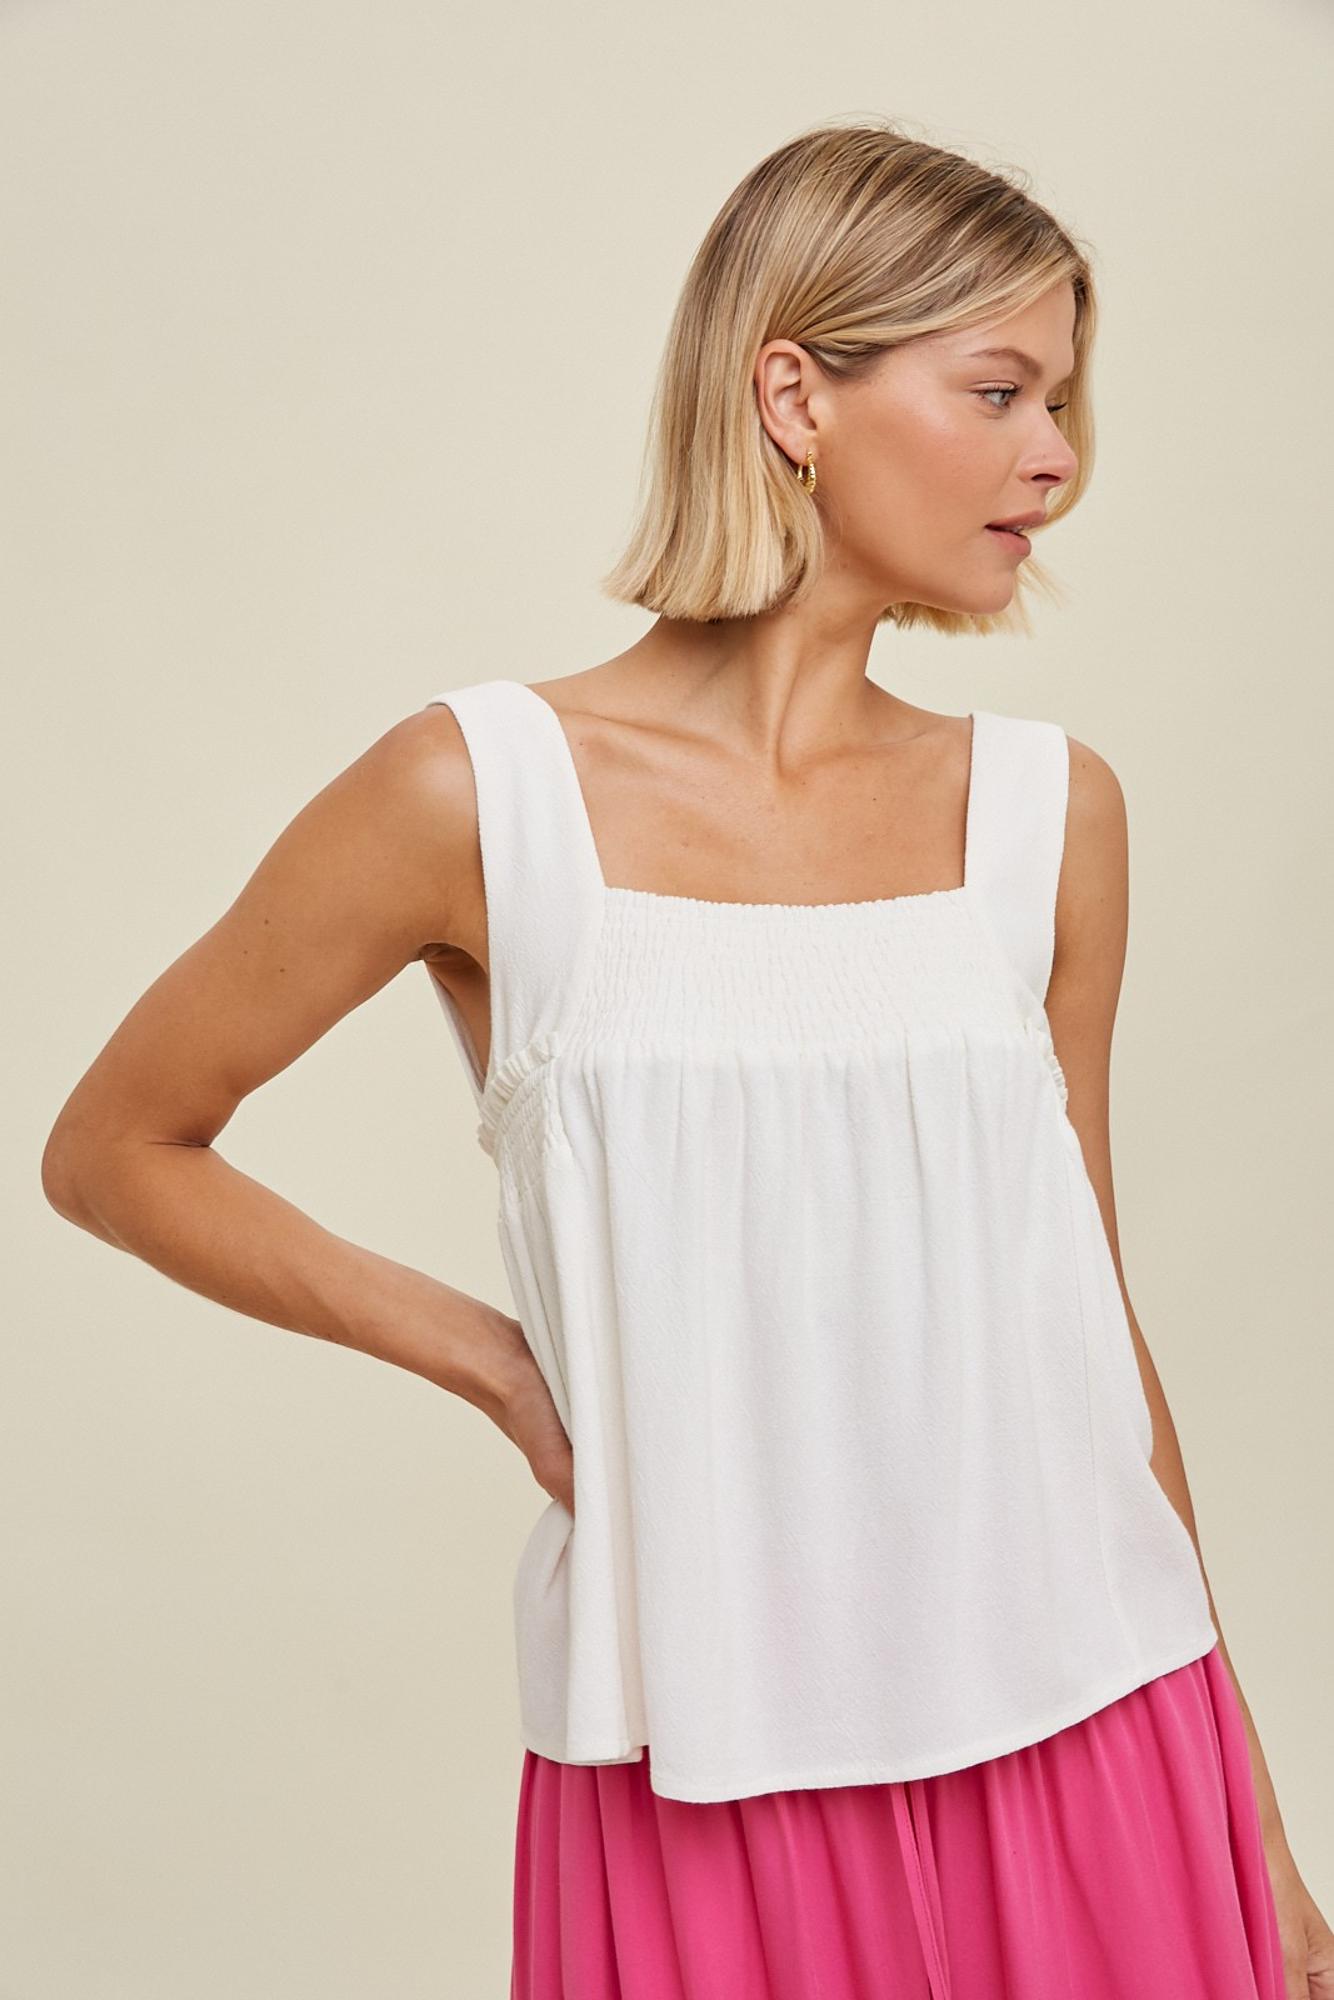 Go Out West Square Neck Tank Top